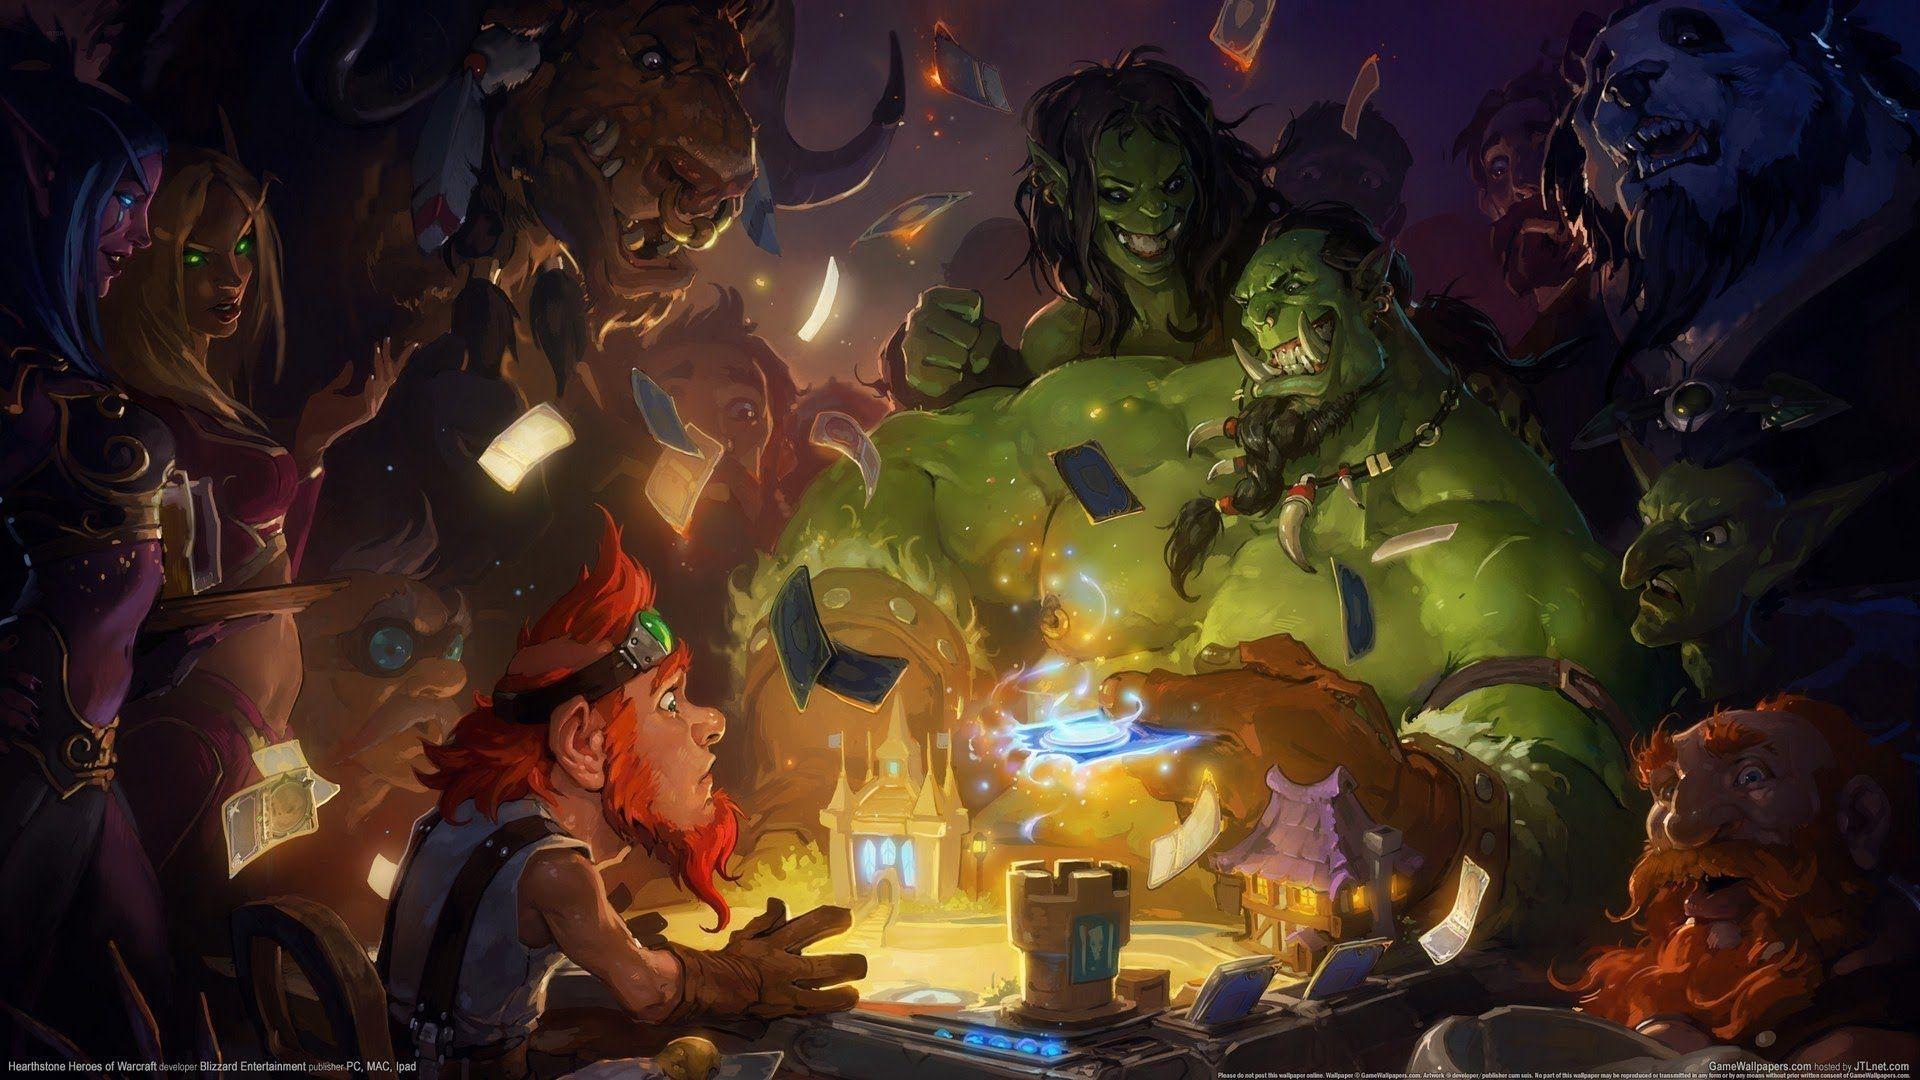 Wallpaper ID 112590  Hearthstone Warcraft artwork digital art cave  dungeon underground kobolds Hearthstone Kobolds and Catacombs video  games candles dragon fire free download